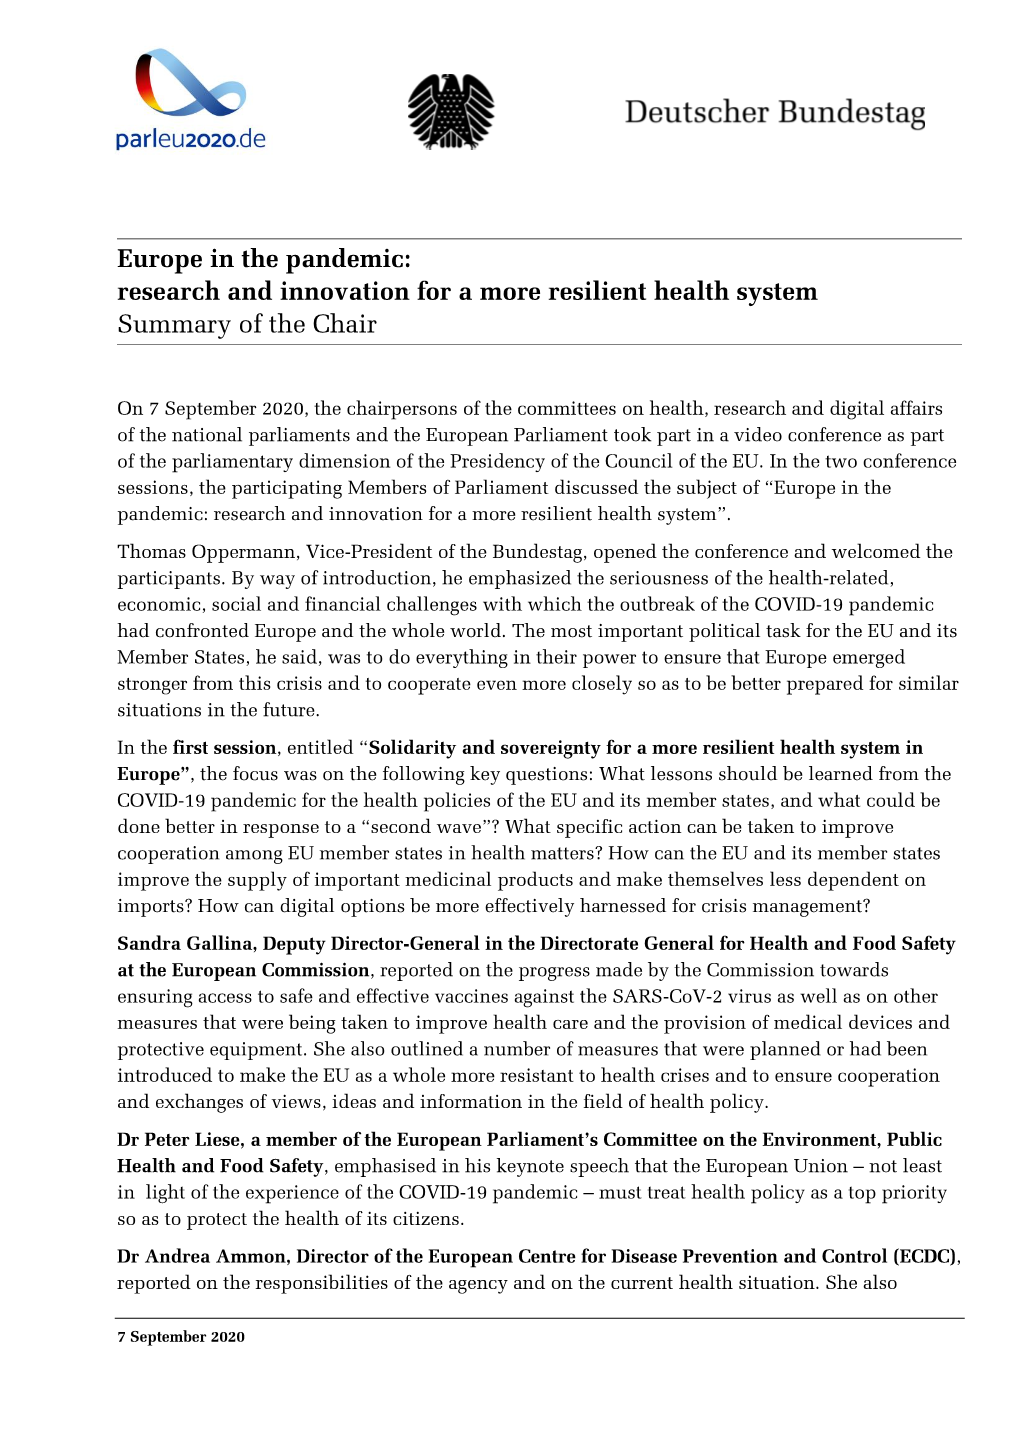 Europe in the Pandemic: Research and Innovation for a More Resilient Health System Summary of the Chair